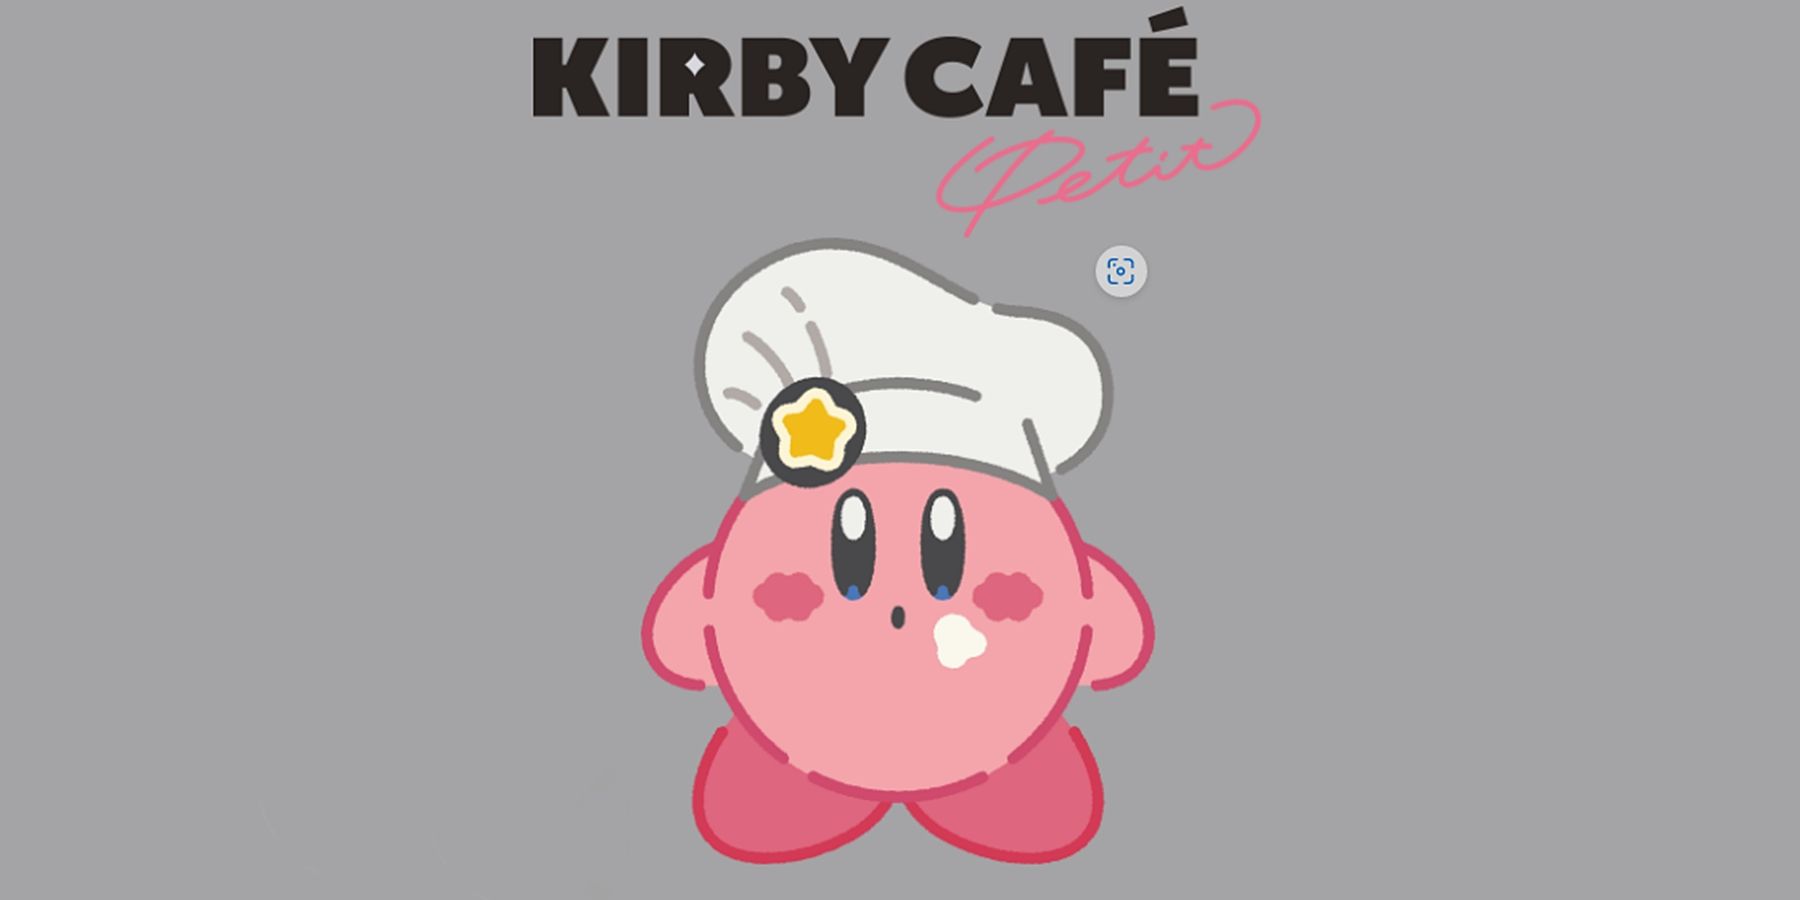 New Kirby Cafe is Opening in Japan